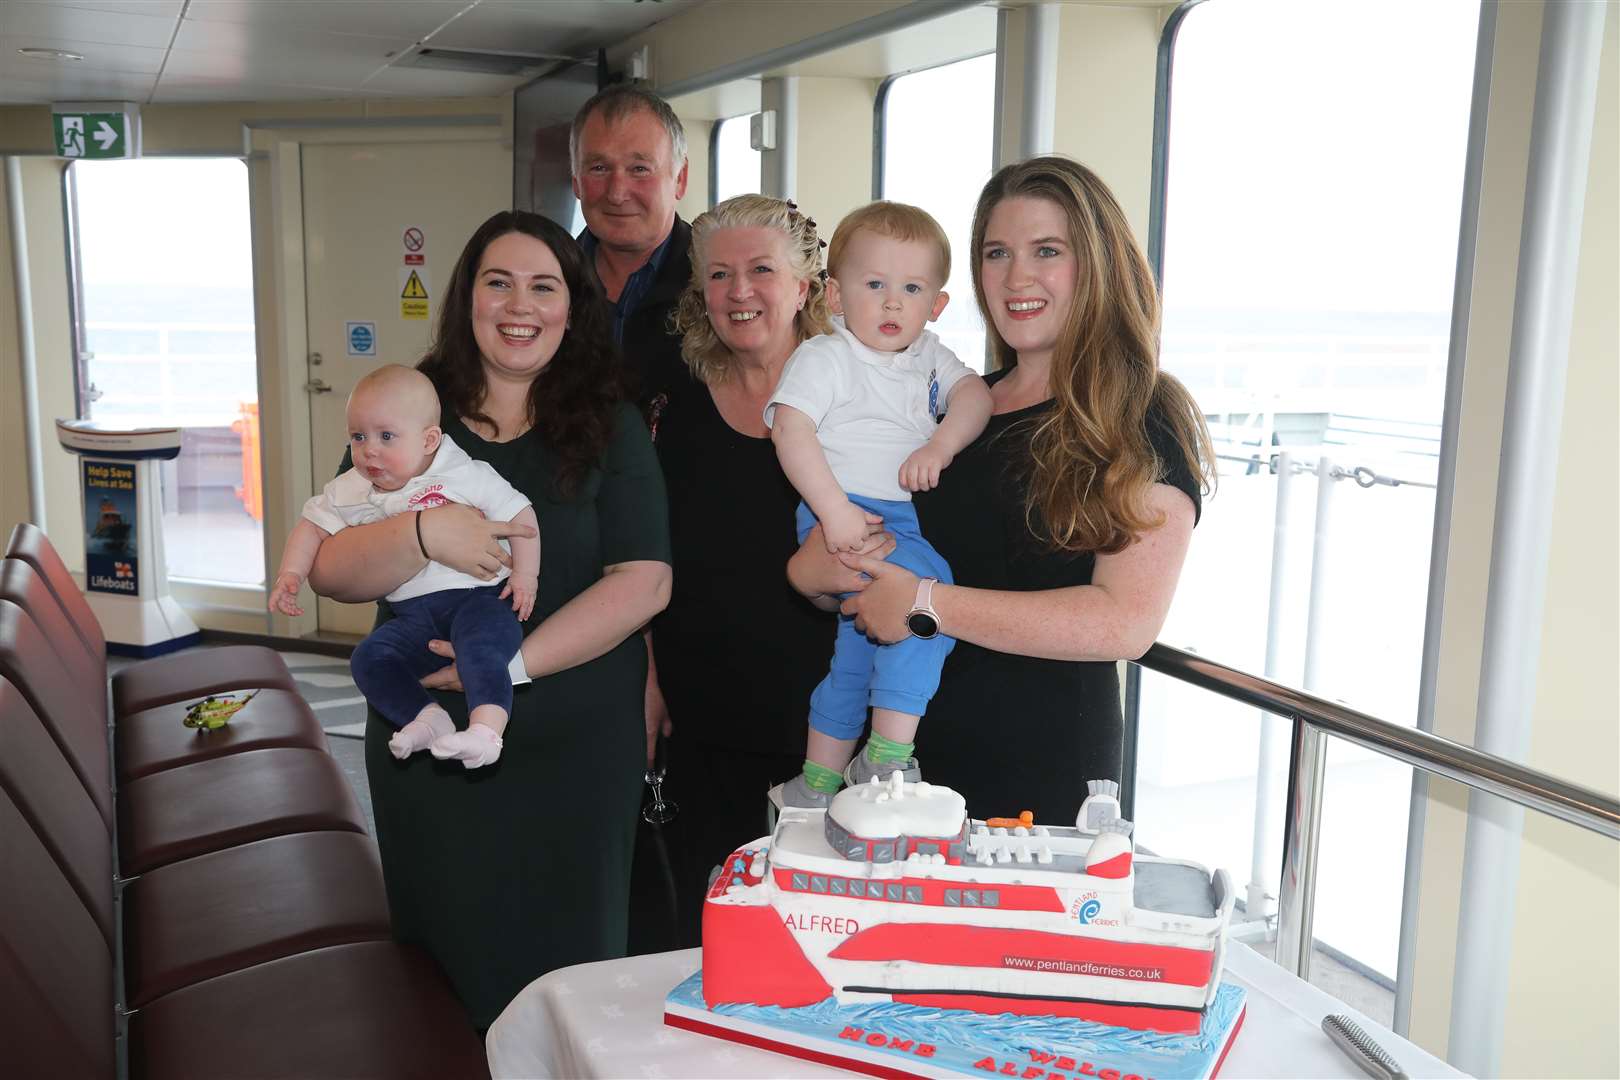 Members of the Banks family with their MV Alfred cake which was cut by Laura Banks. From left: Jess and Jenni Wilson, Andrew Banks, Susan Banks, Eddy and Laura Banks.